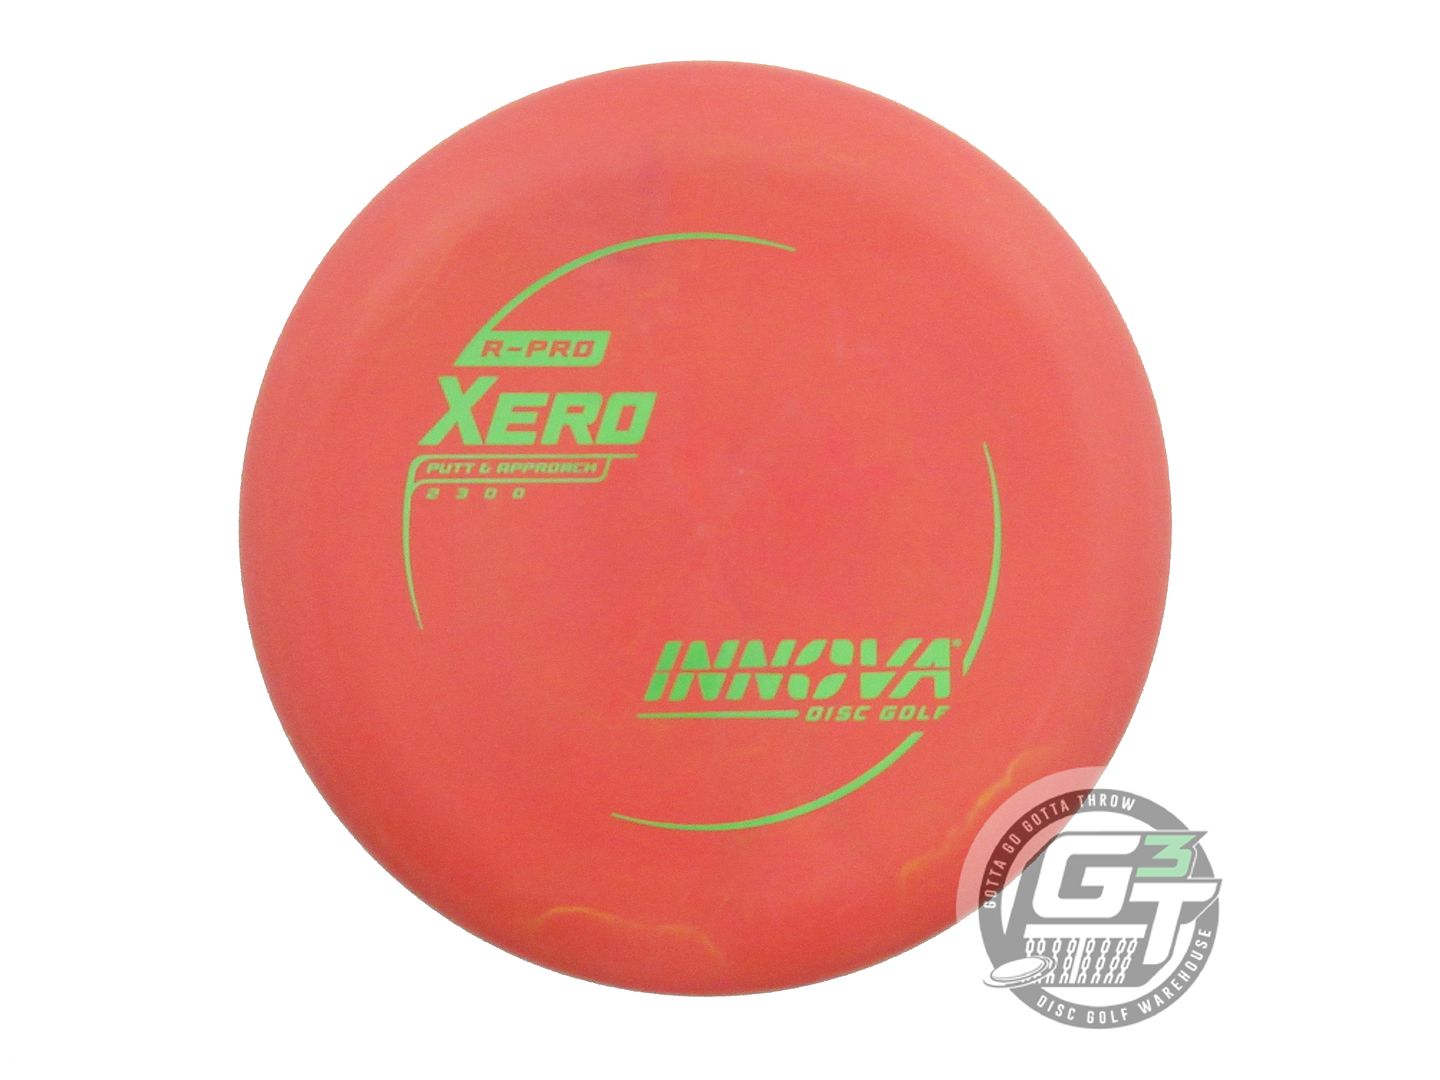 Innova R-Pro Xero Putter Golf Disc (Individually Listed)